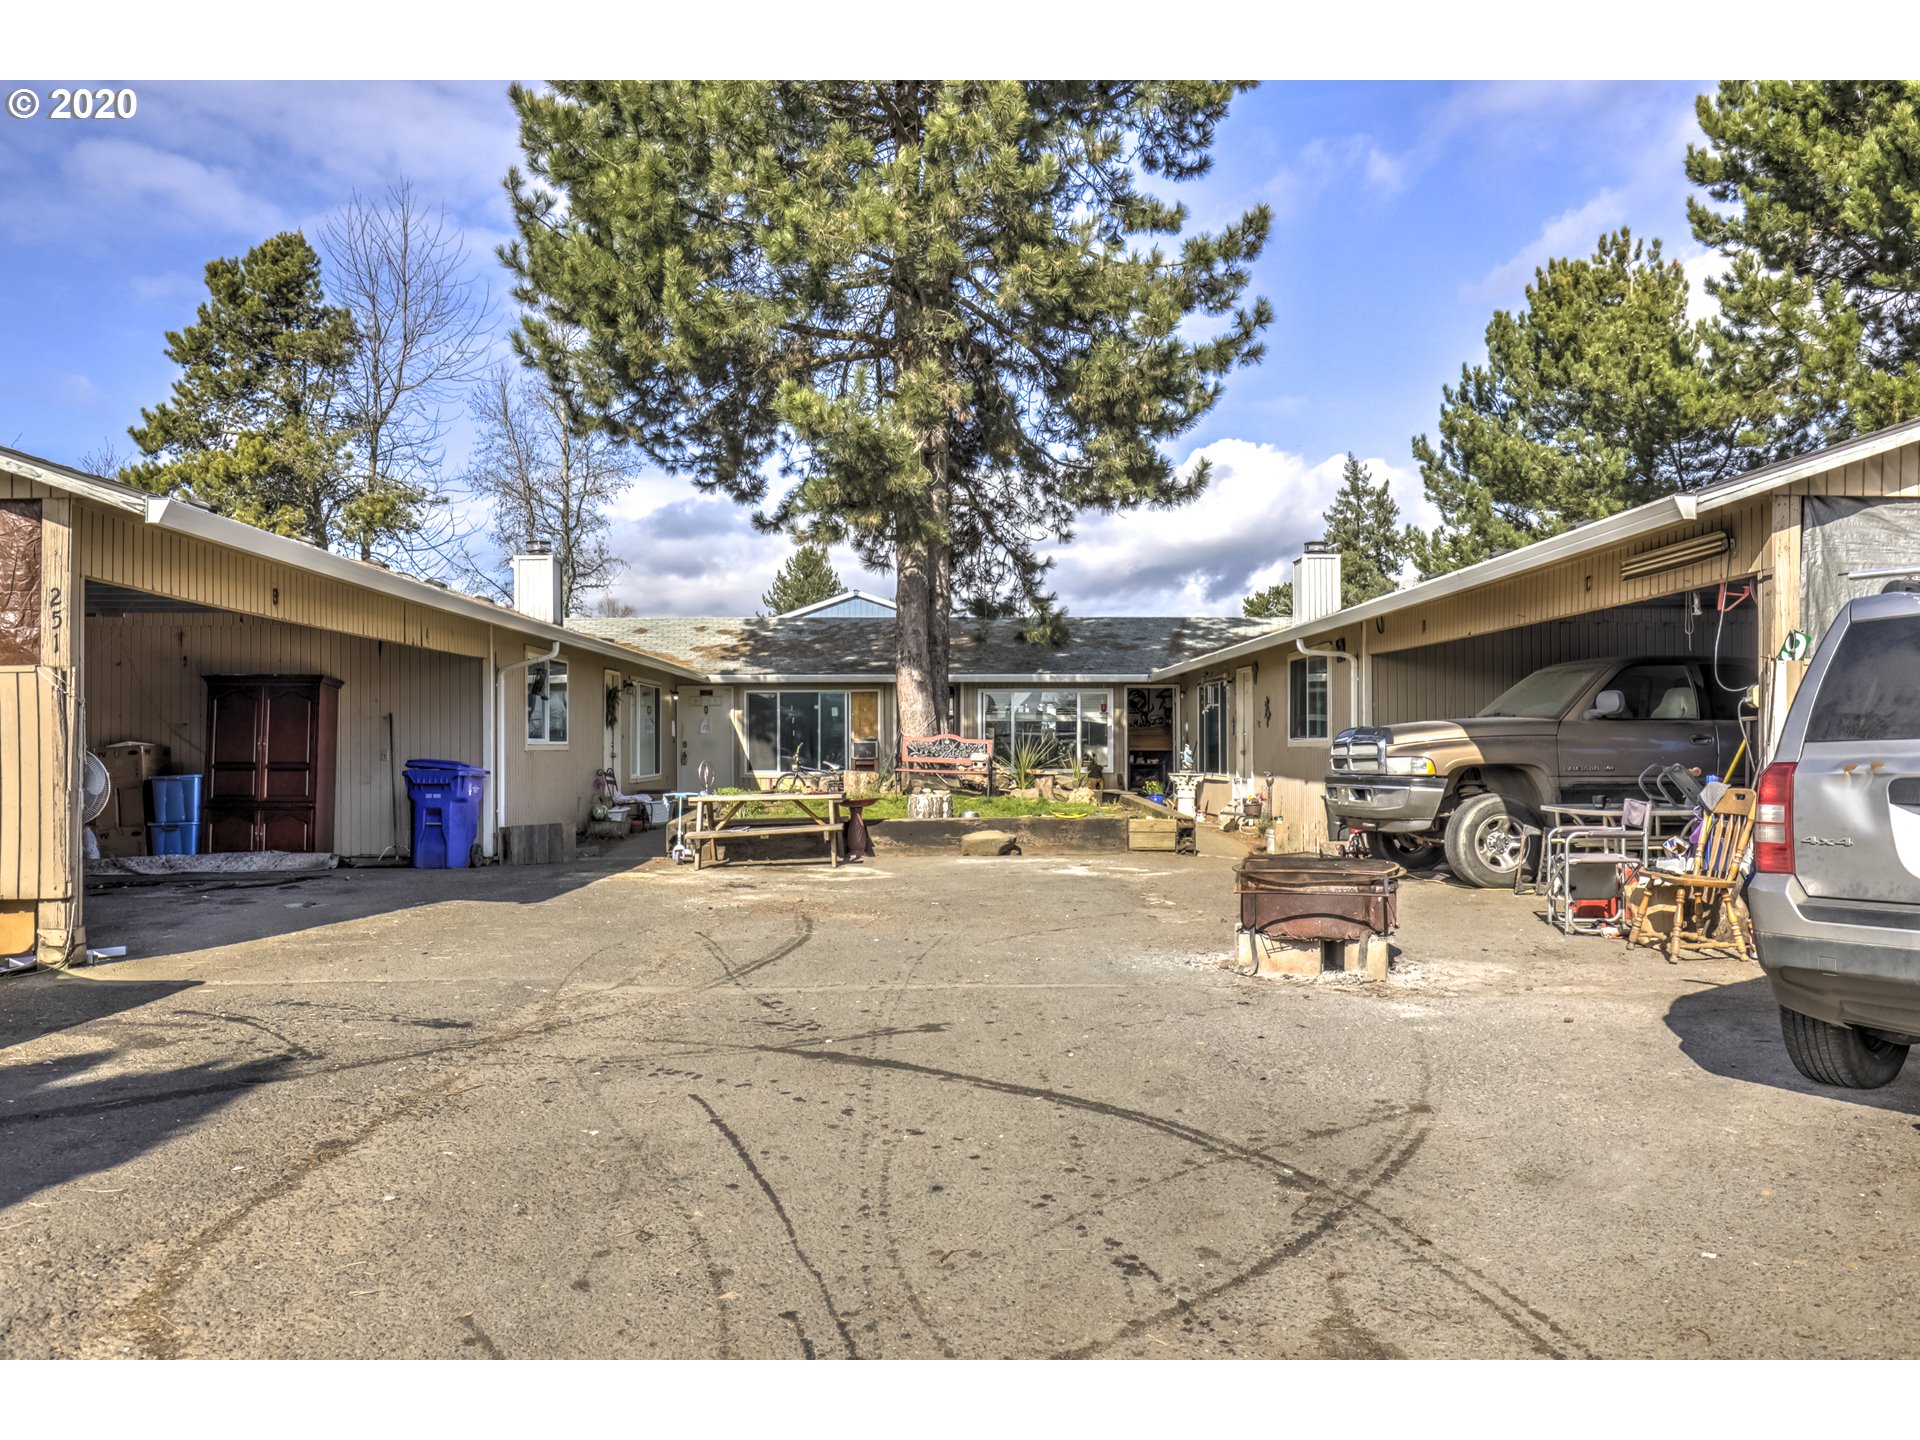 251 N 29TH AVE (1 of 13)